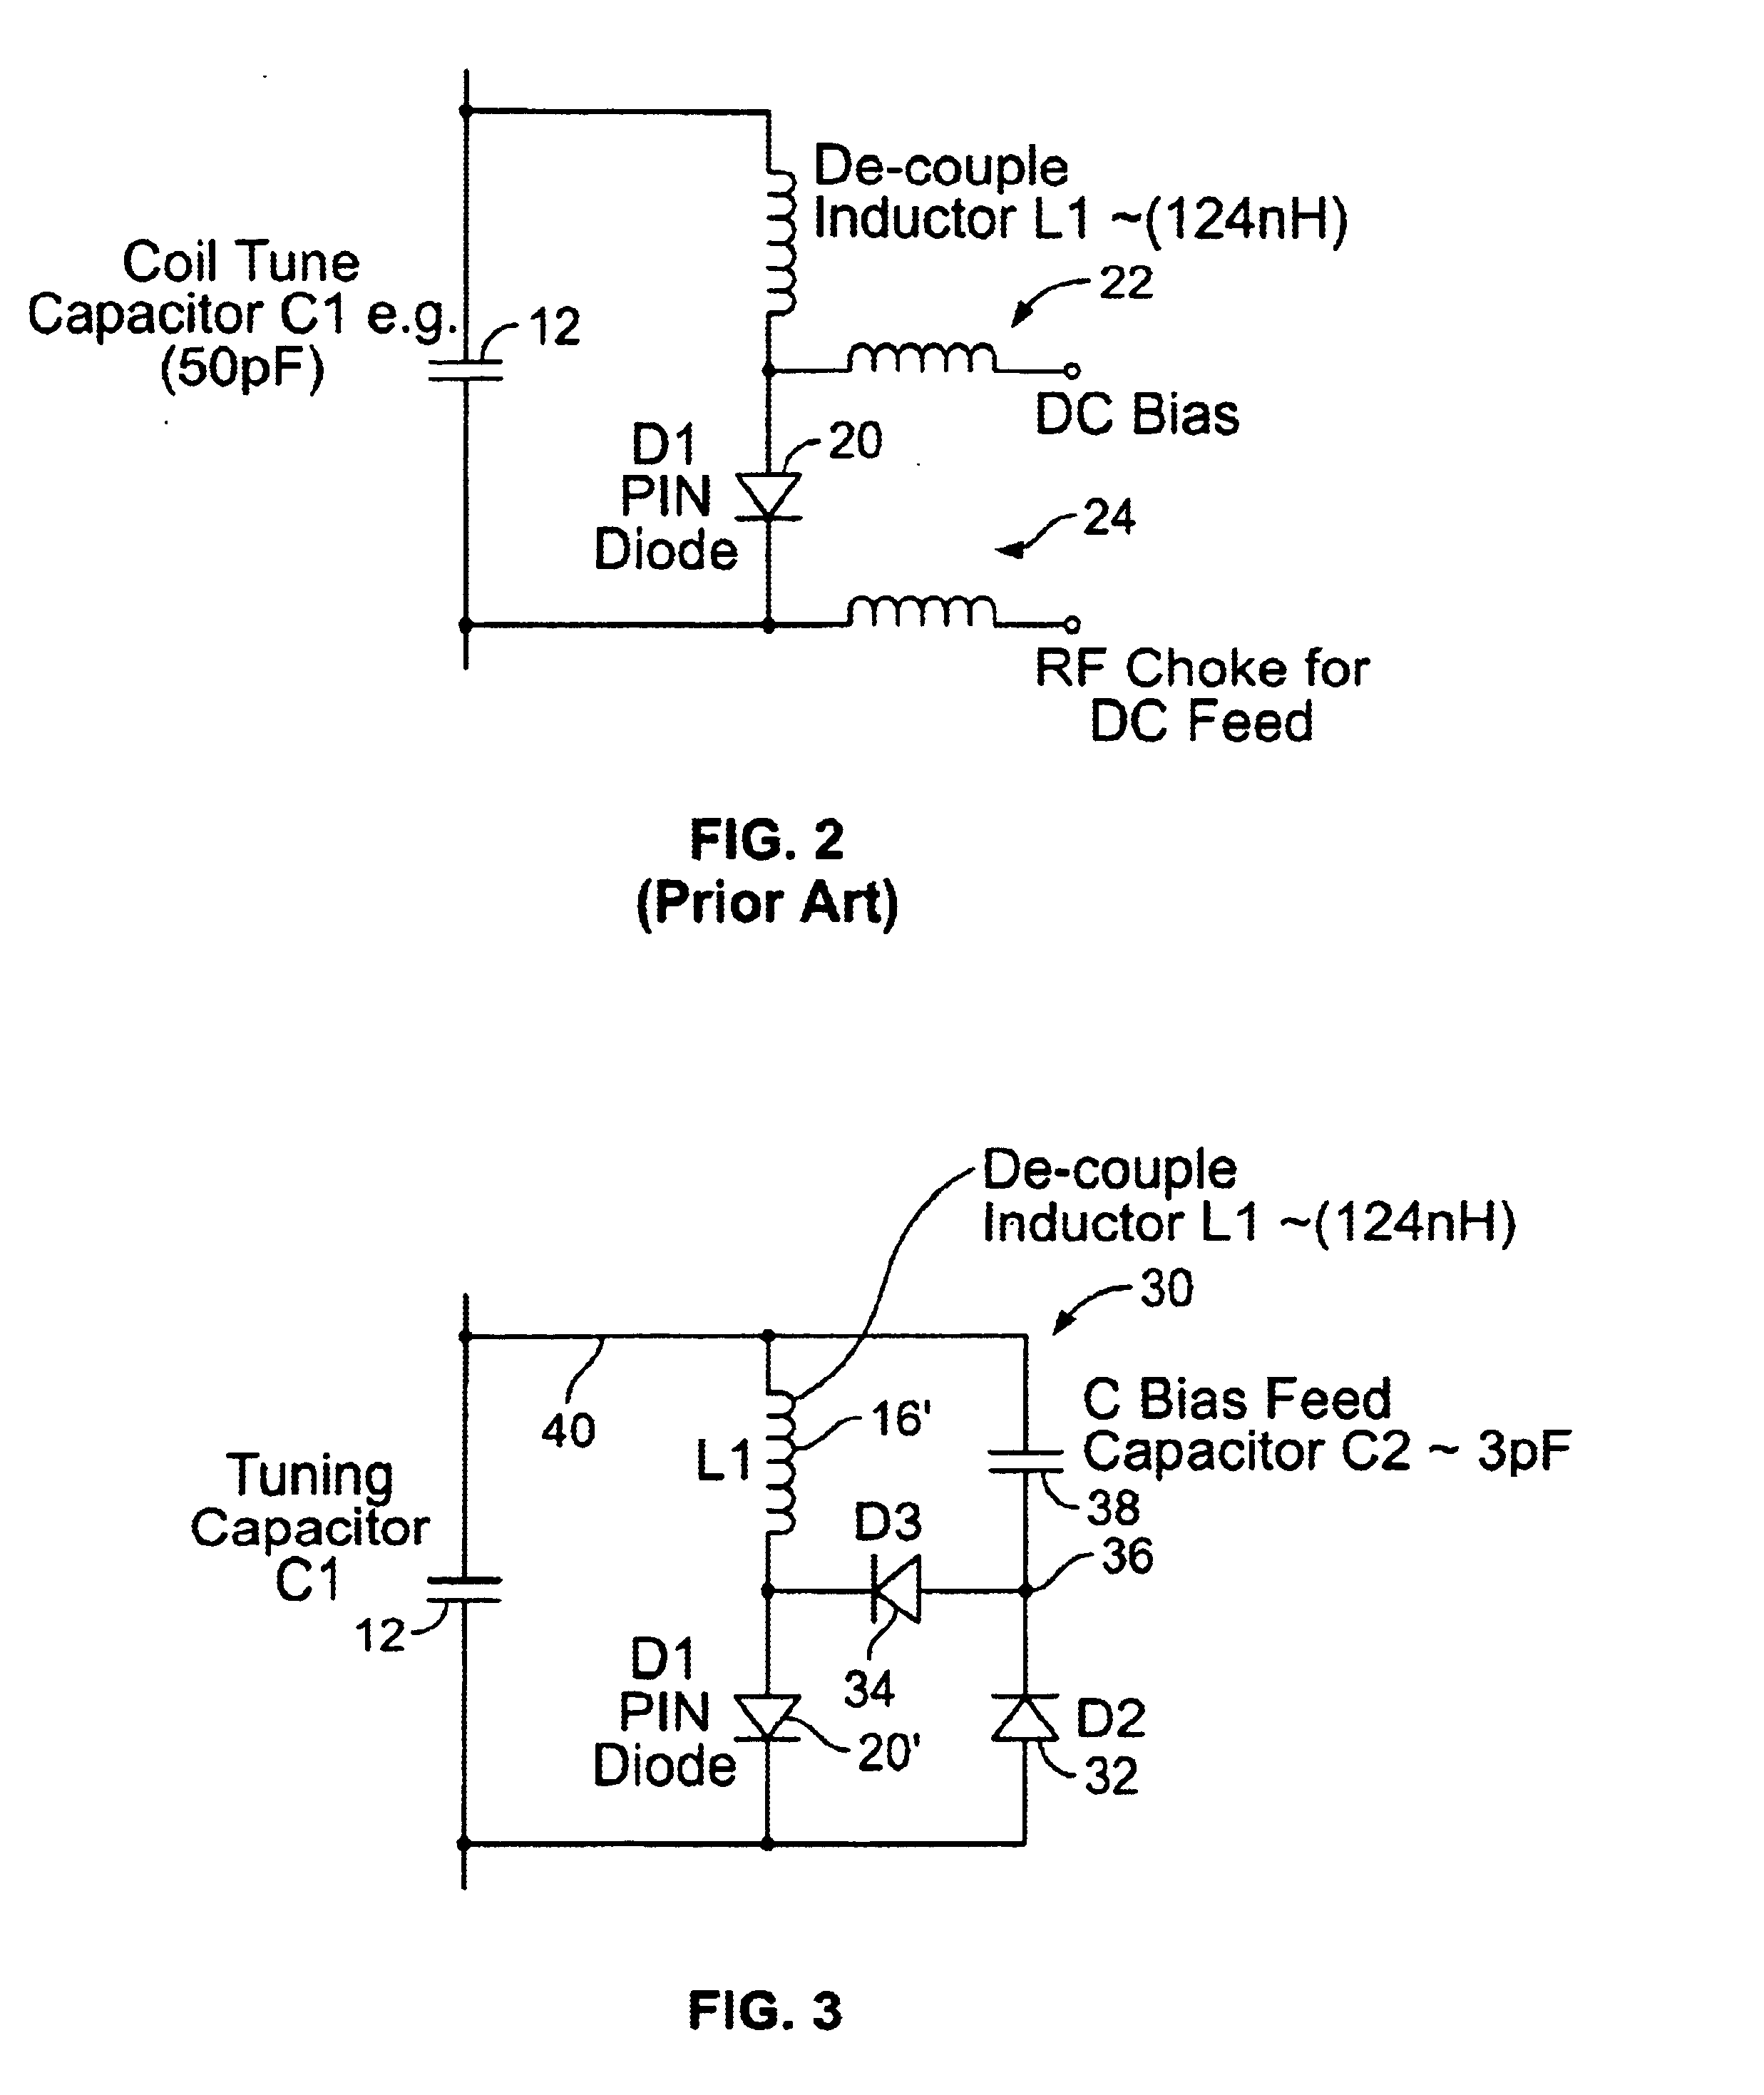 Transmit mode coil detuning for MRI systems